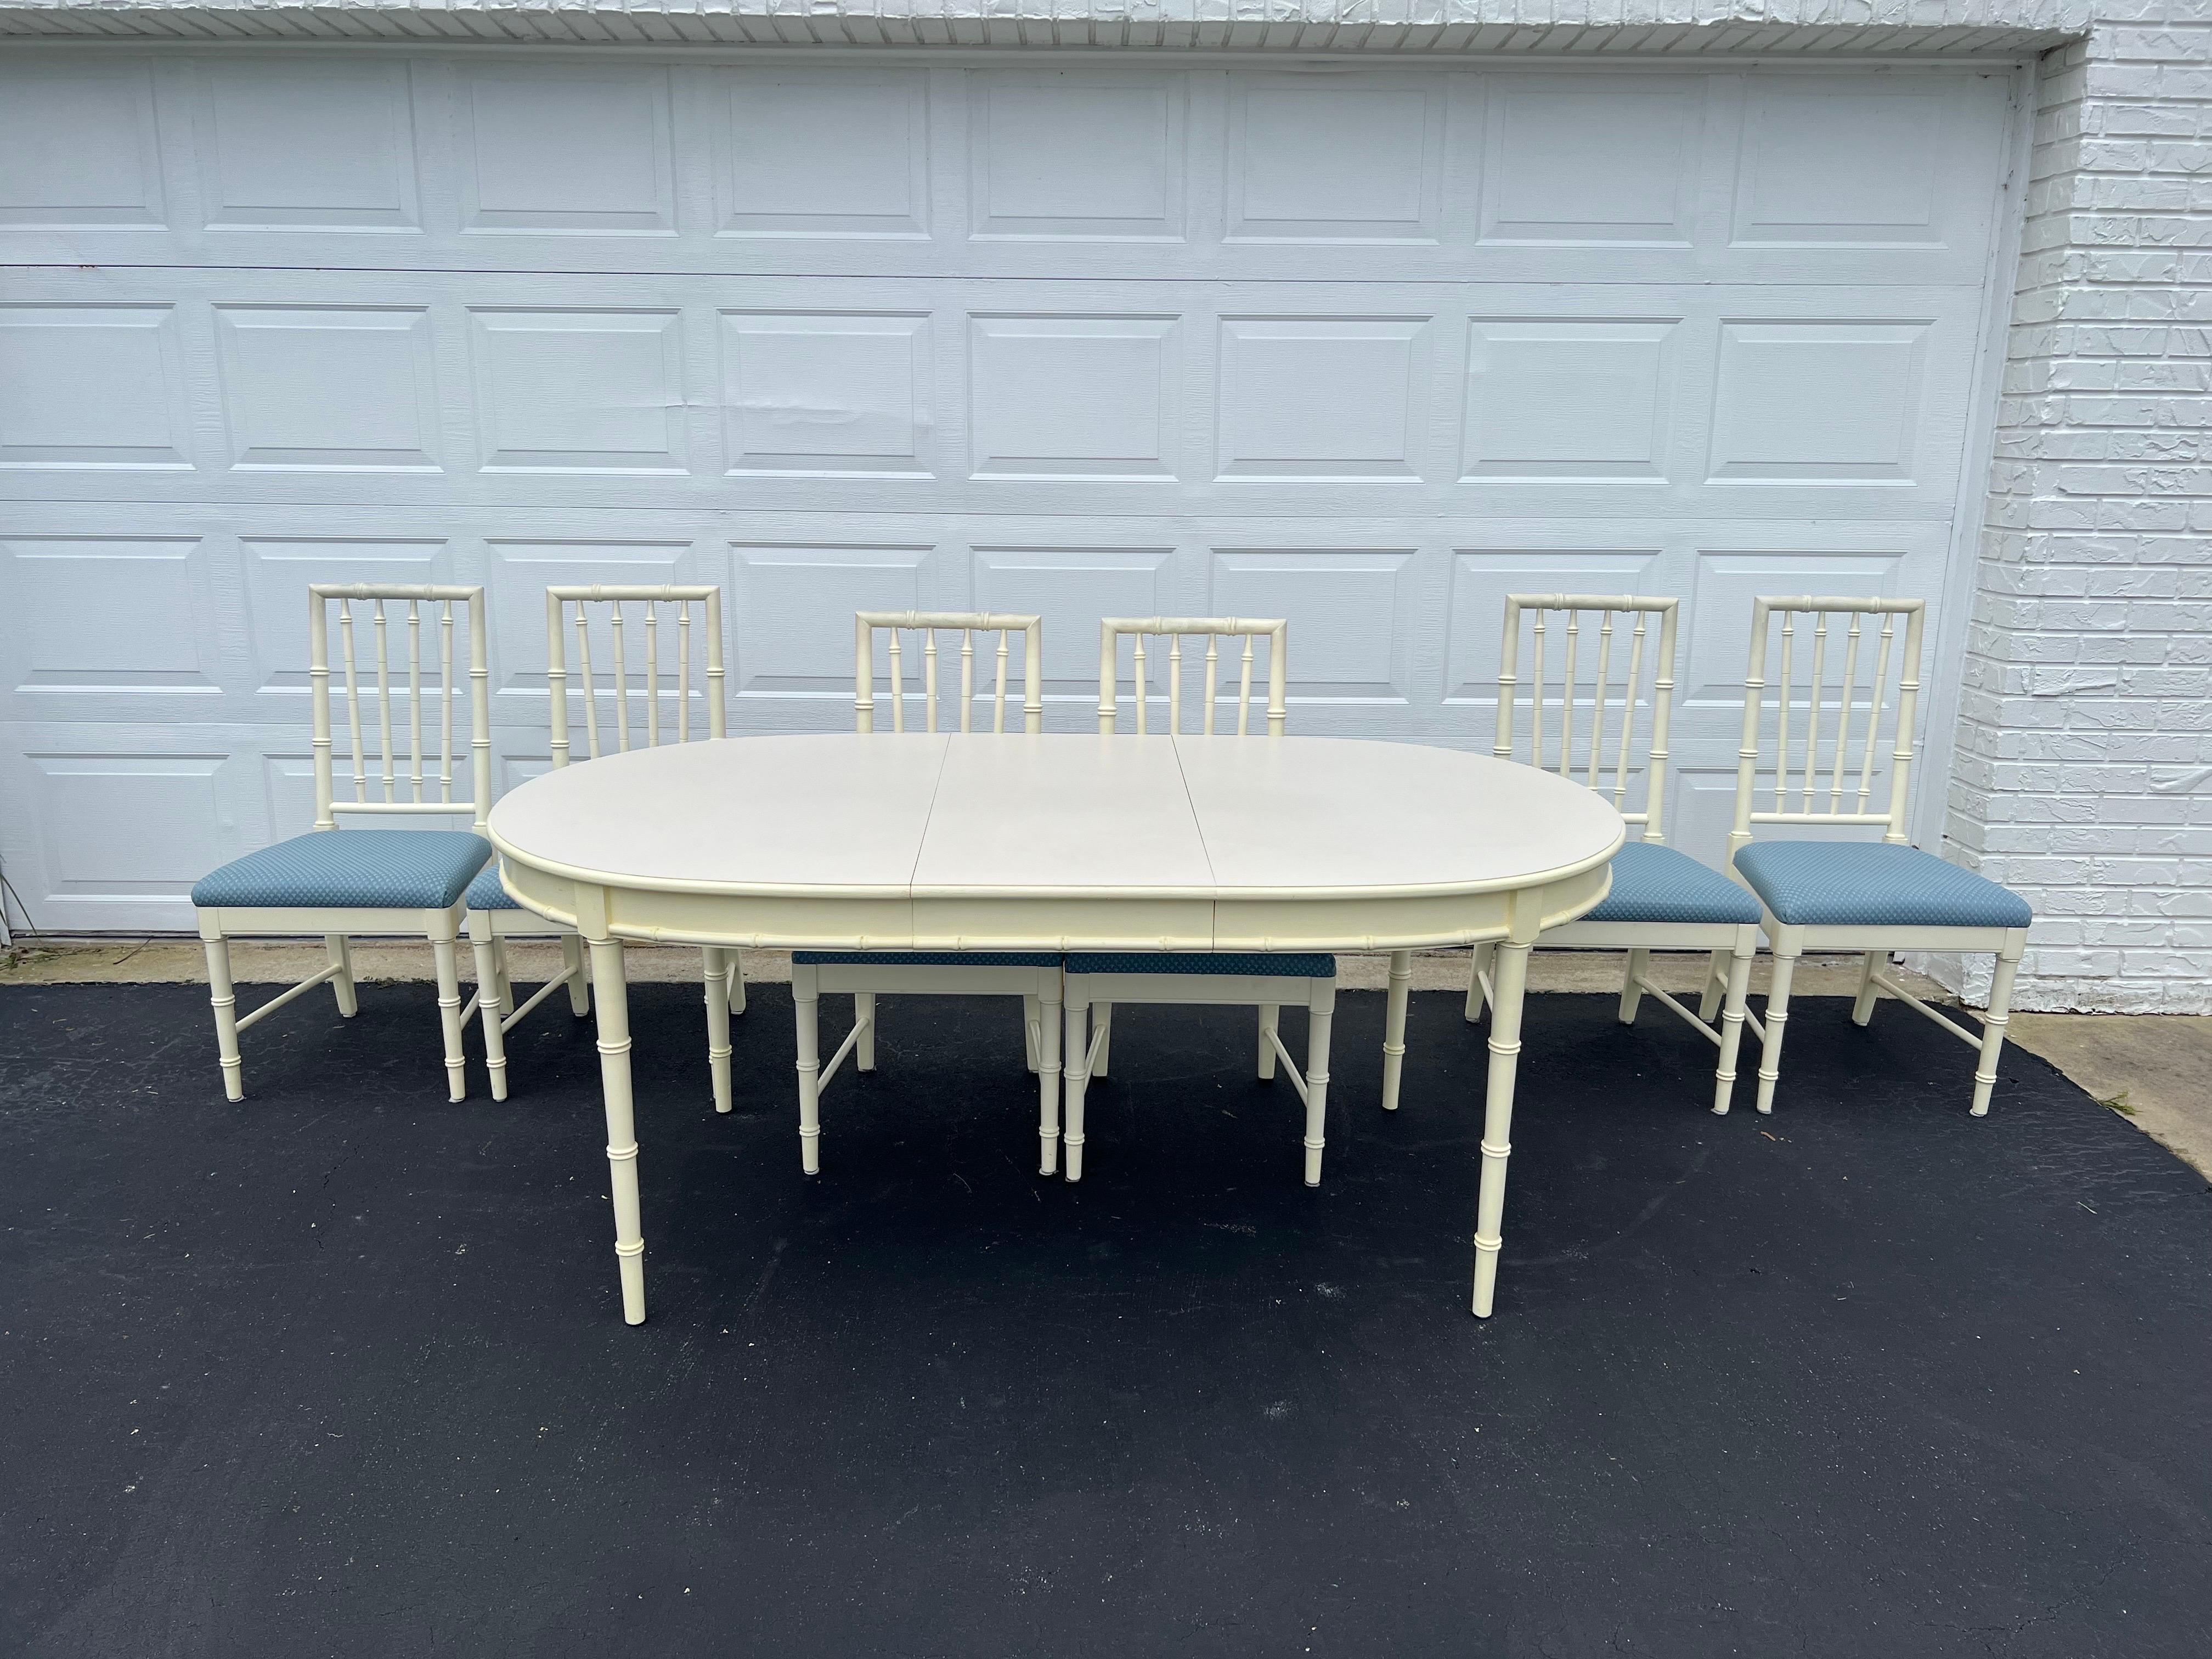 Faux Bamboo Dining Set by Thomasville. Nice solid wooden set that is very sturdy and timeless. Six solid wooden chairs with clean light blue upholstery. The table has a laminate top and has one leaf. This is a creamy white . Not a true white
Seat